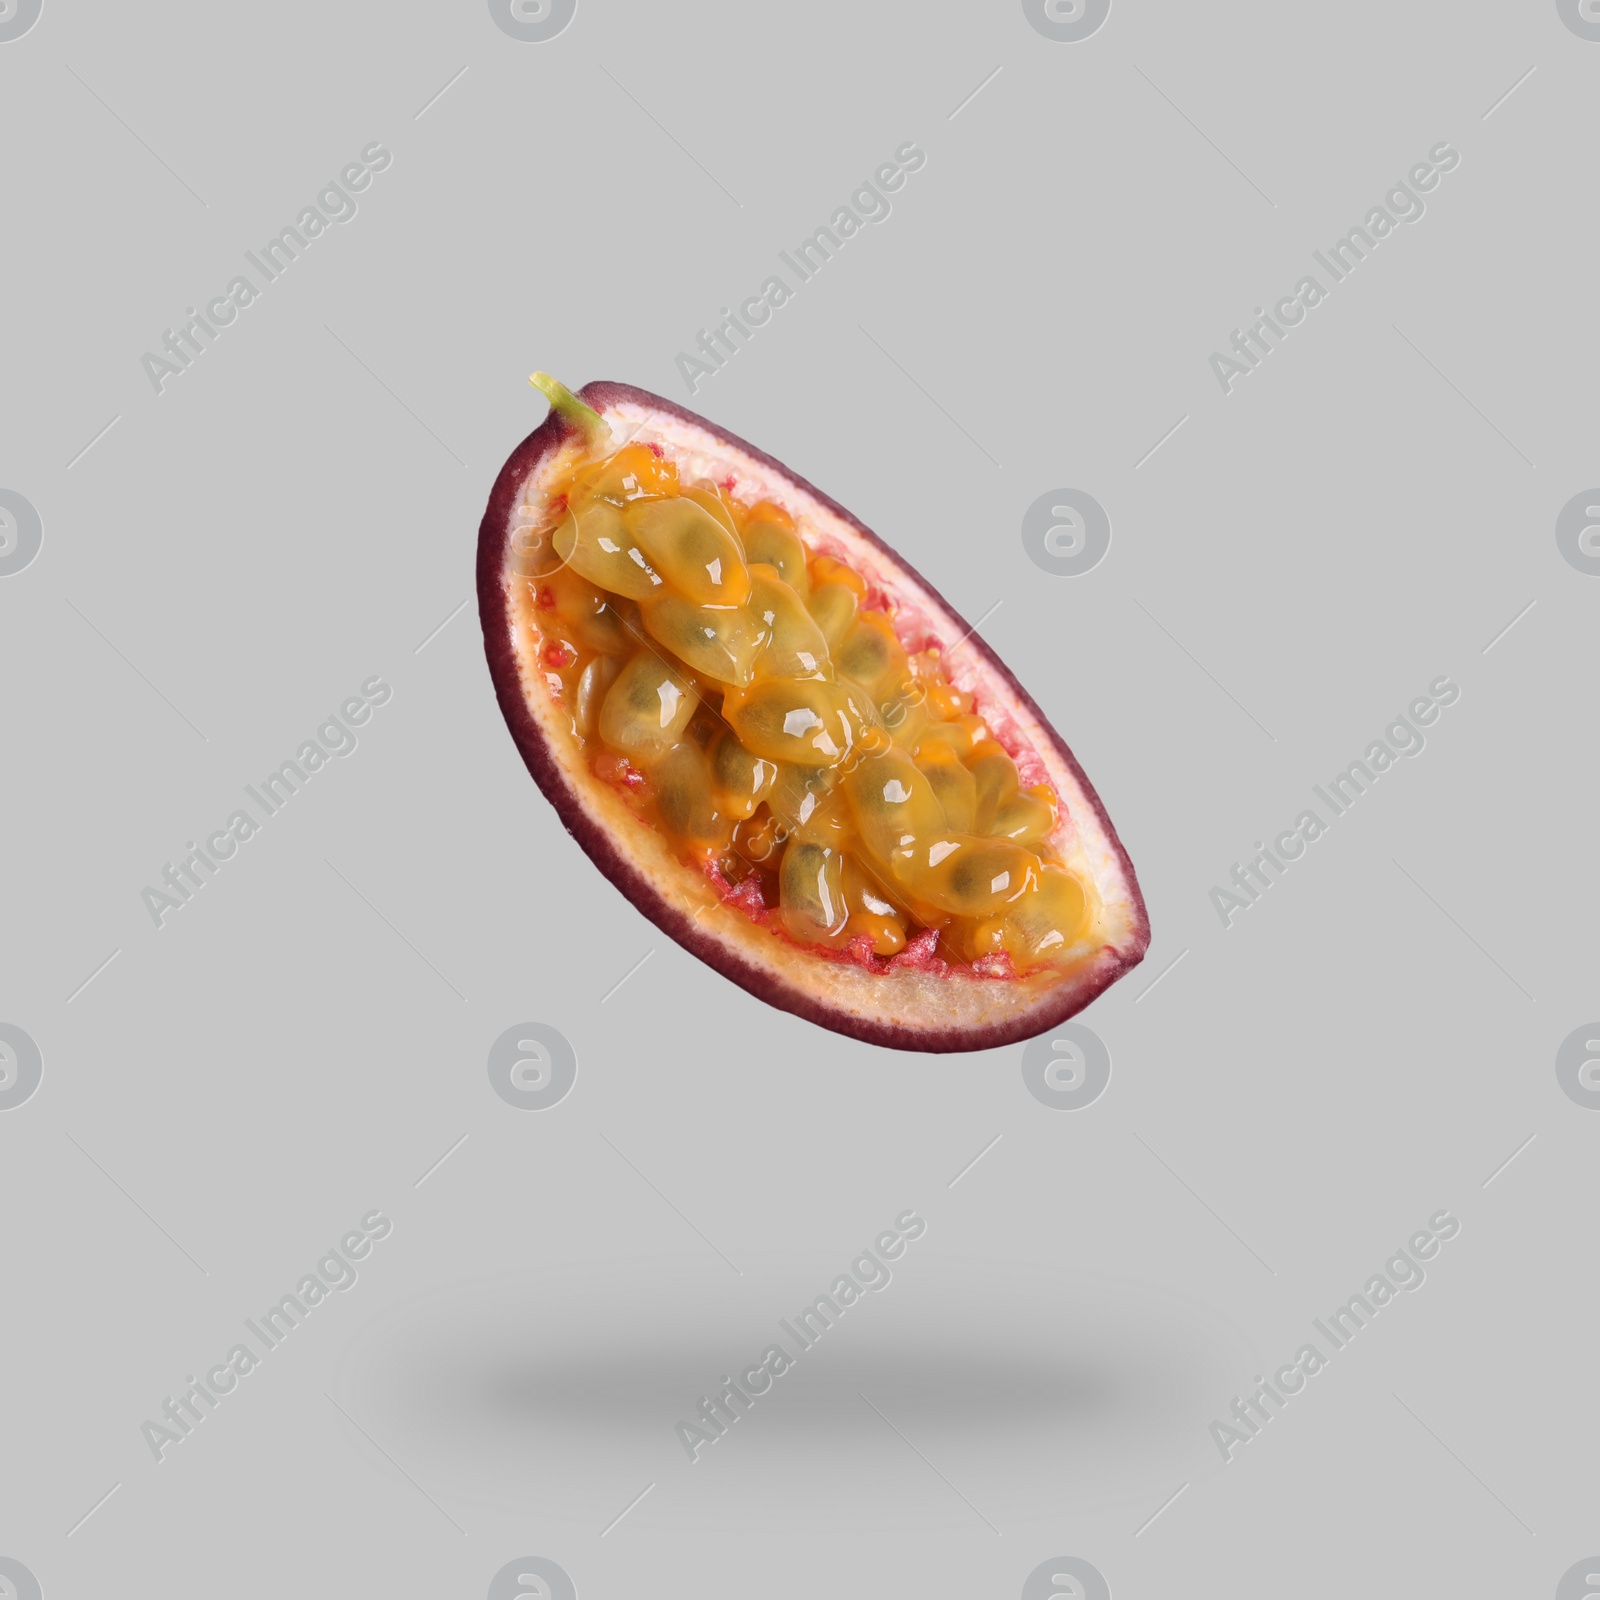 Image of Piece of passion fruit falling on light grey background